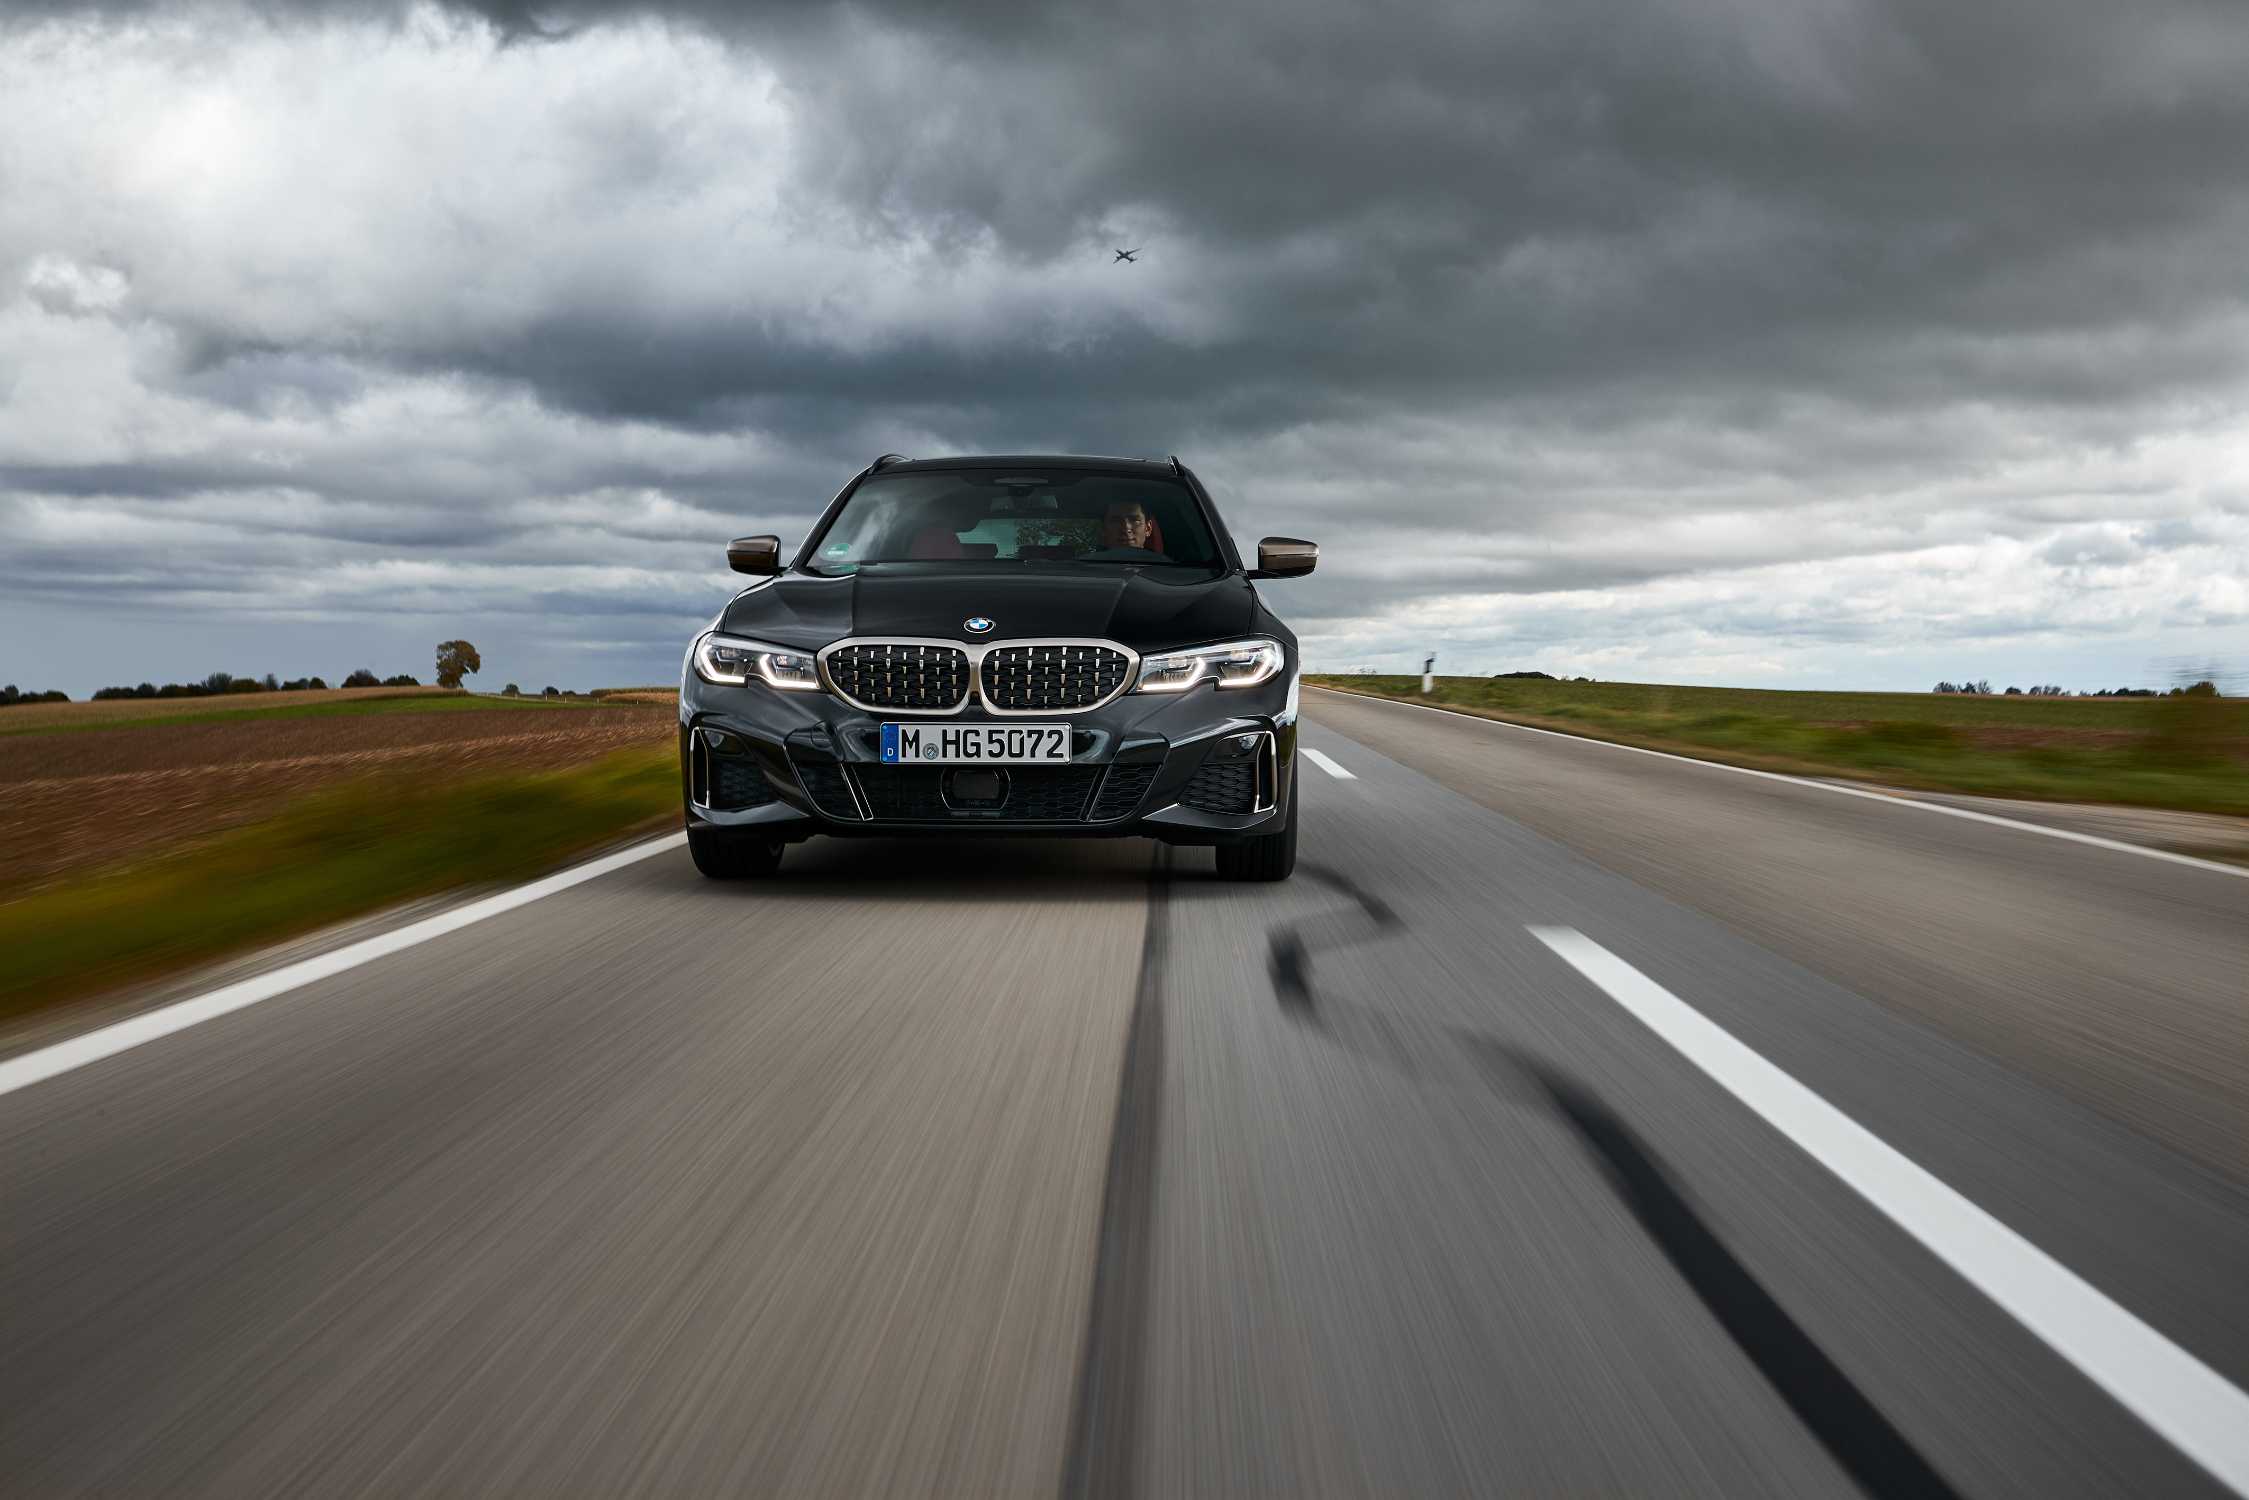 Power and athleticism. The new BMW M340i xDrive Touring celebrates